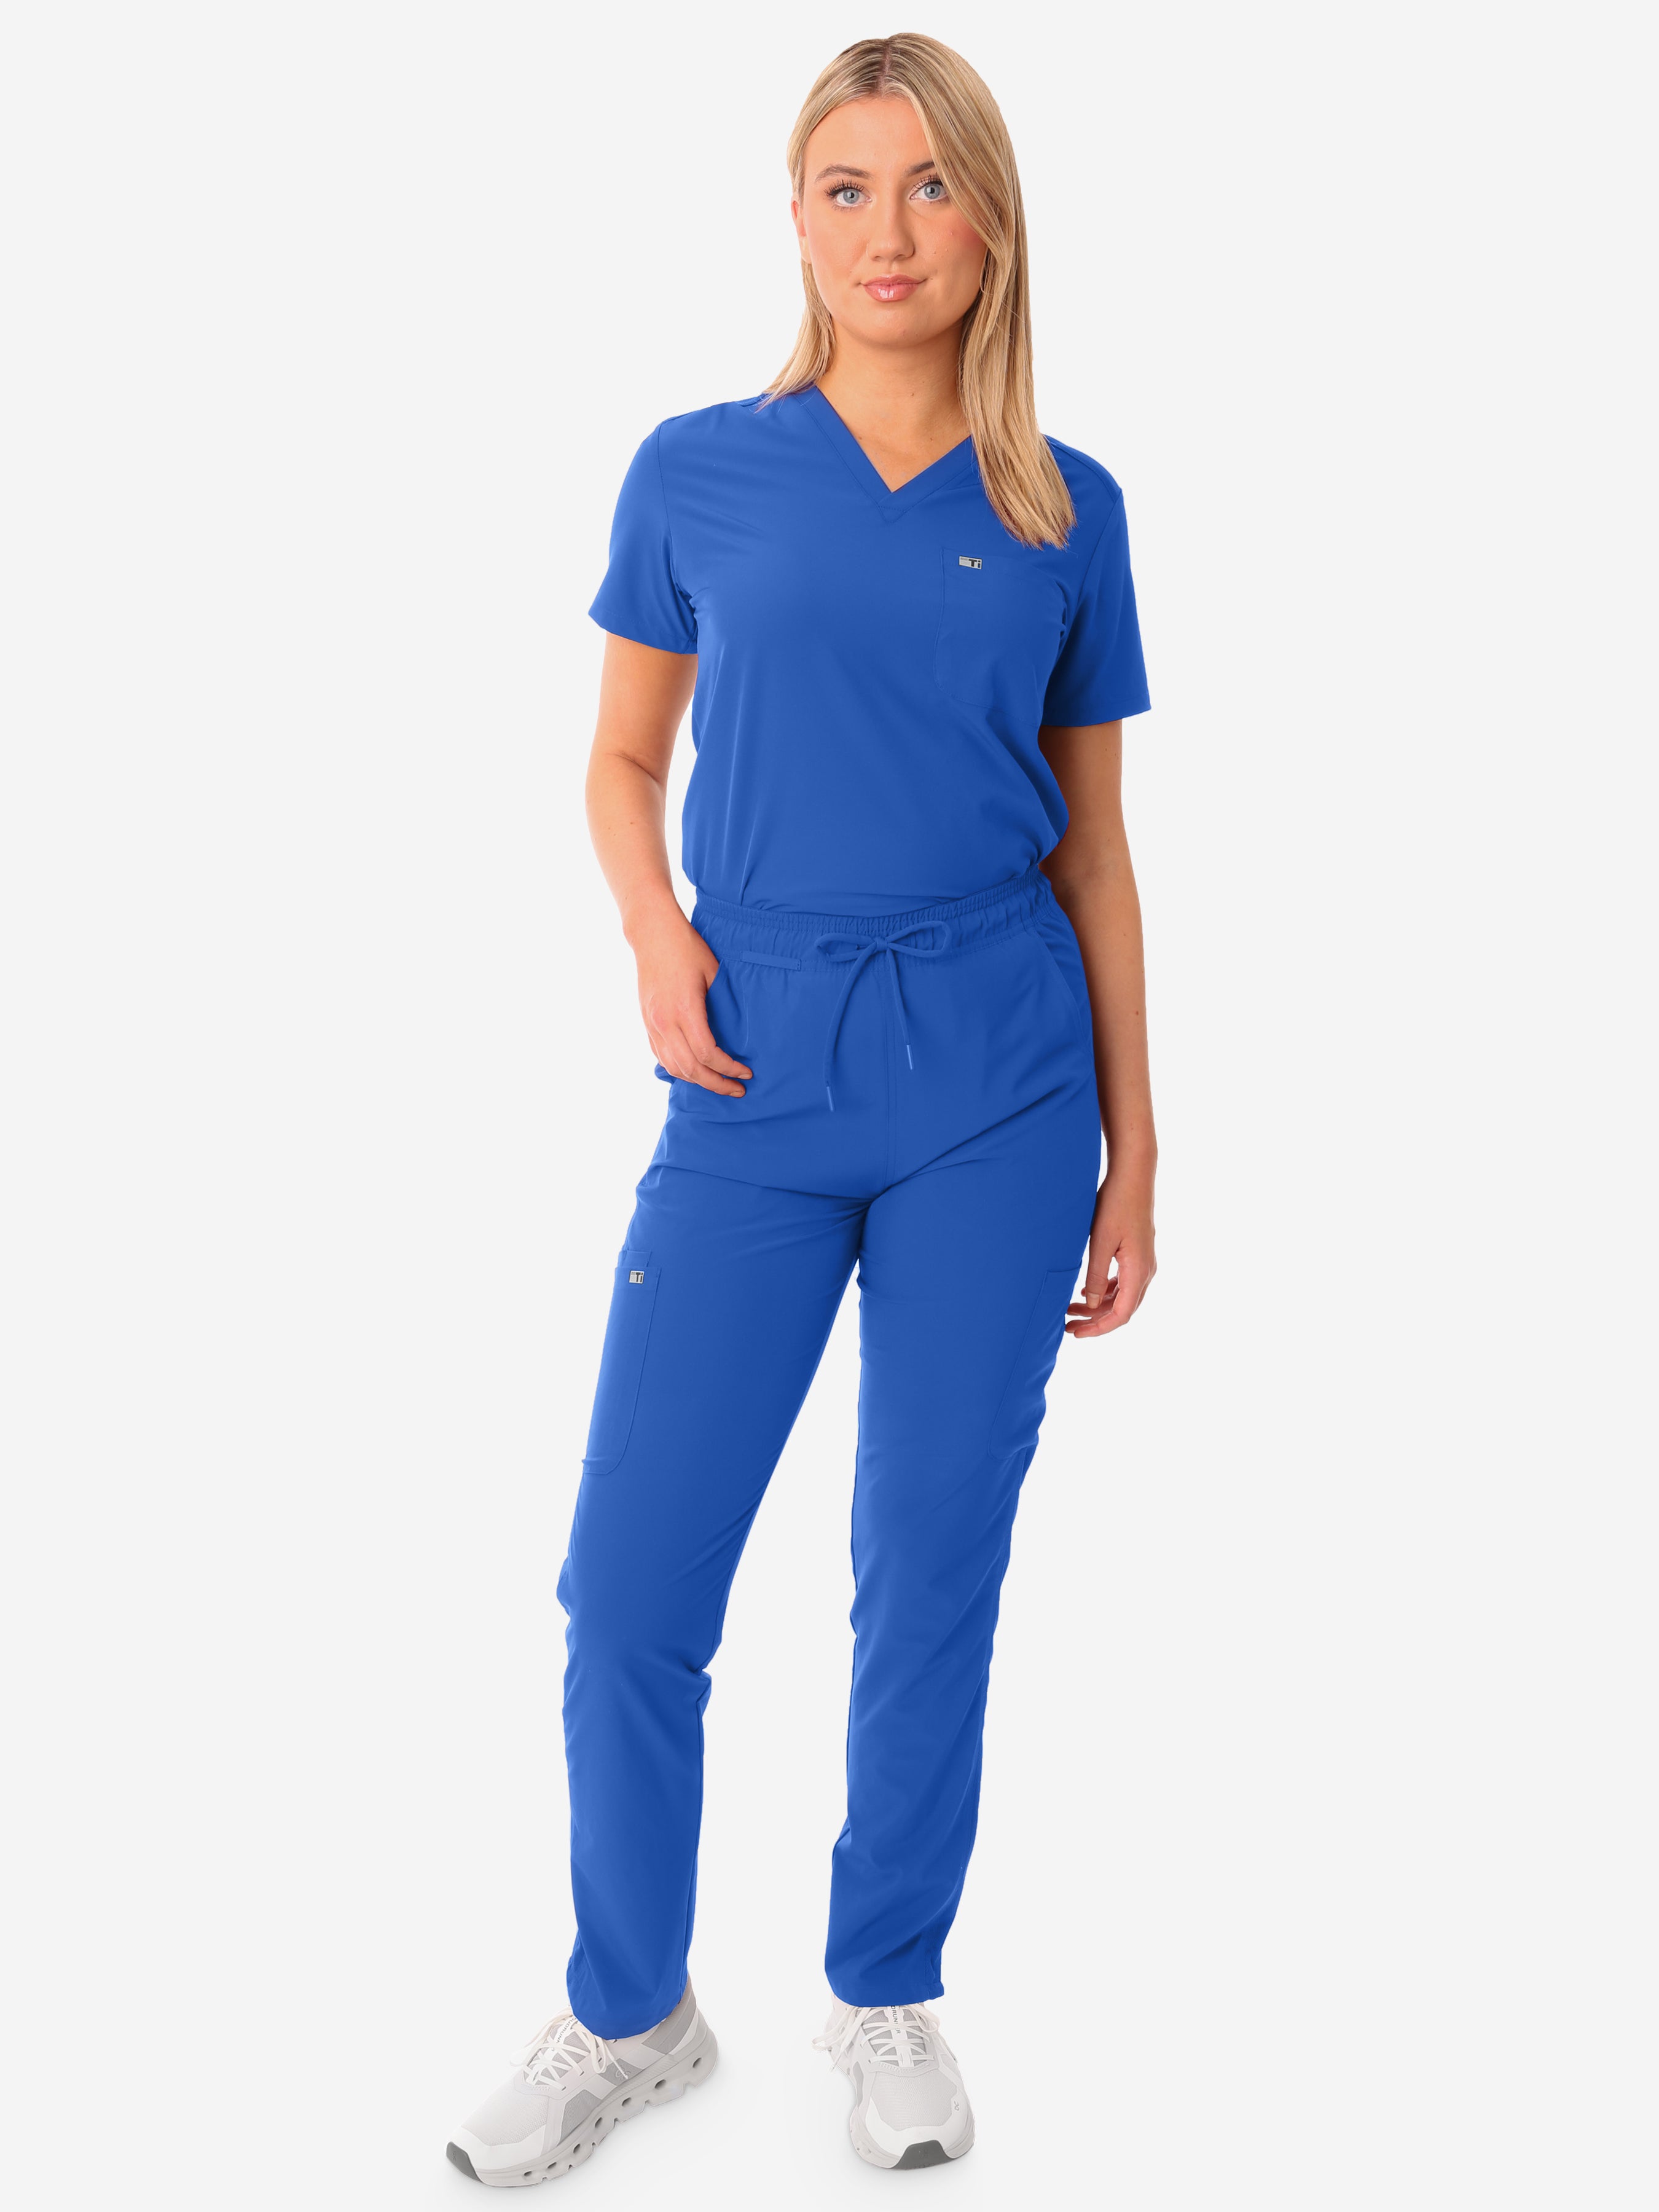 TiScrubs Royal Blue Women&#39;s Stretch 9-Pocket Pants and One-Pocket Tuckable Top Front View Full Body